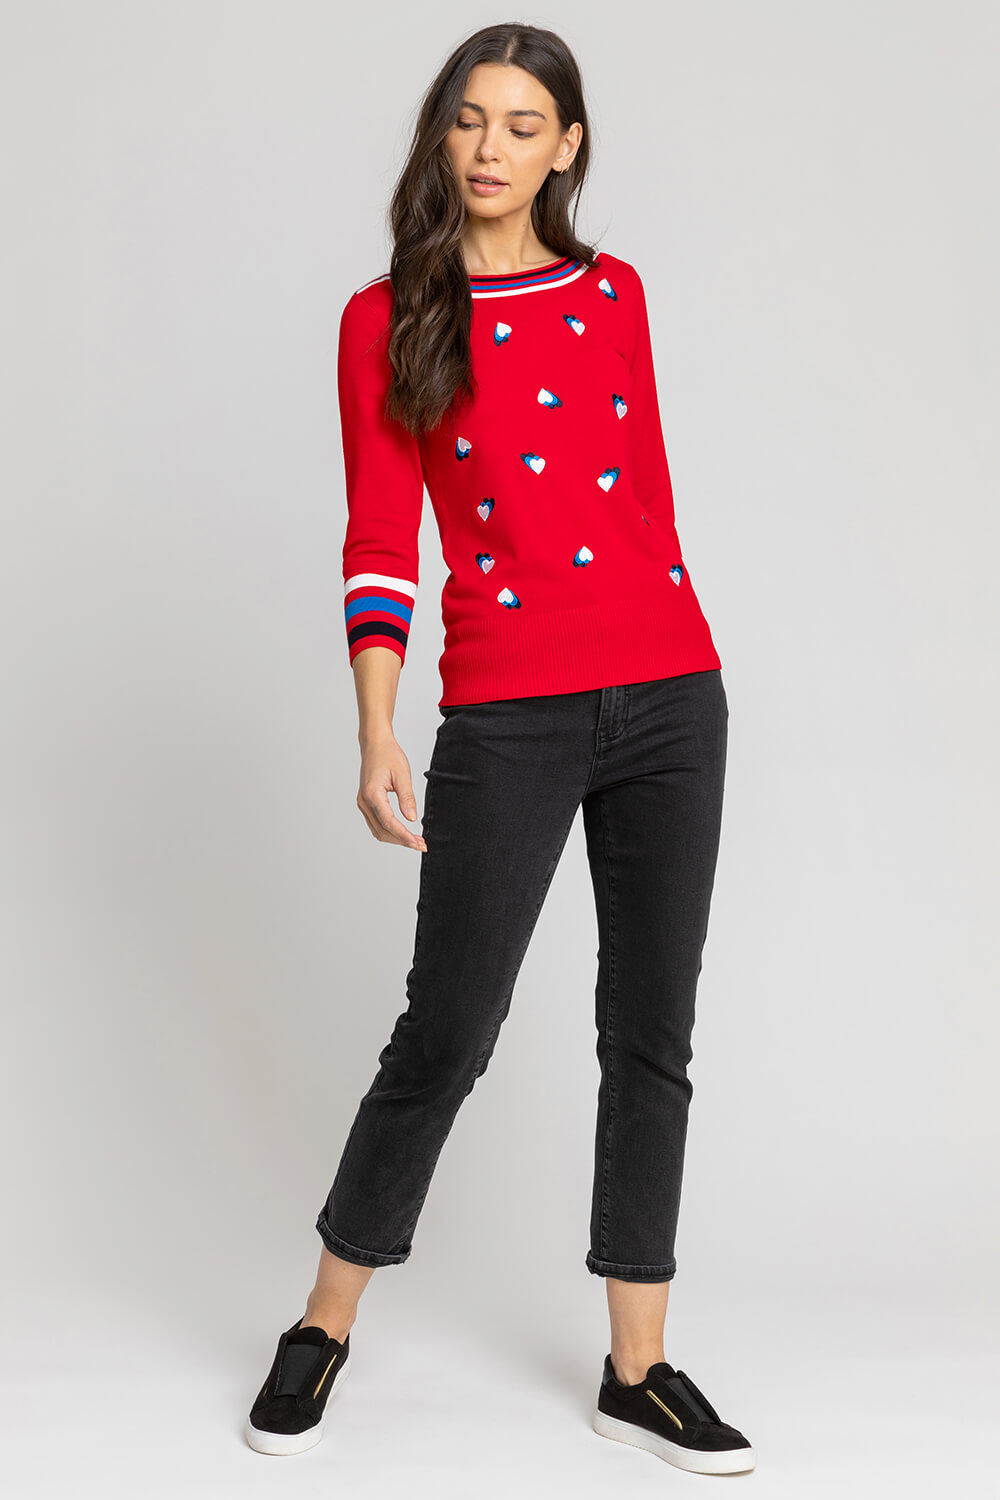 Red Heart Embroidered Stripe Print Jumper, Image 3 of 4